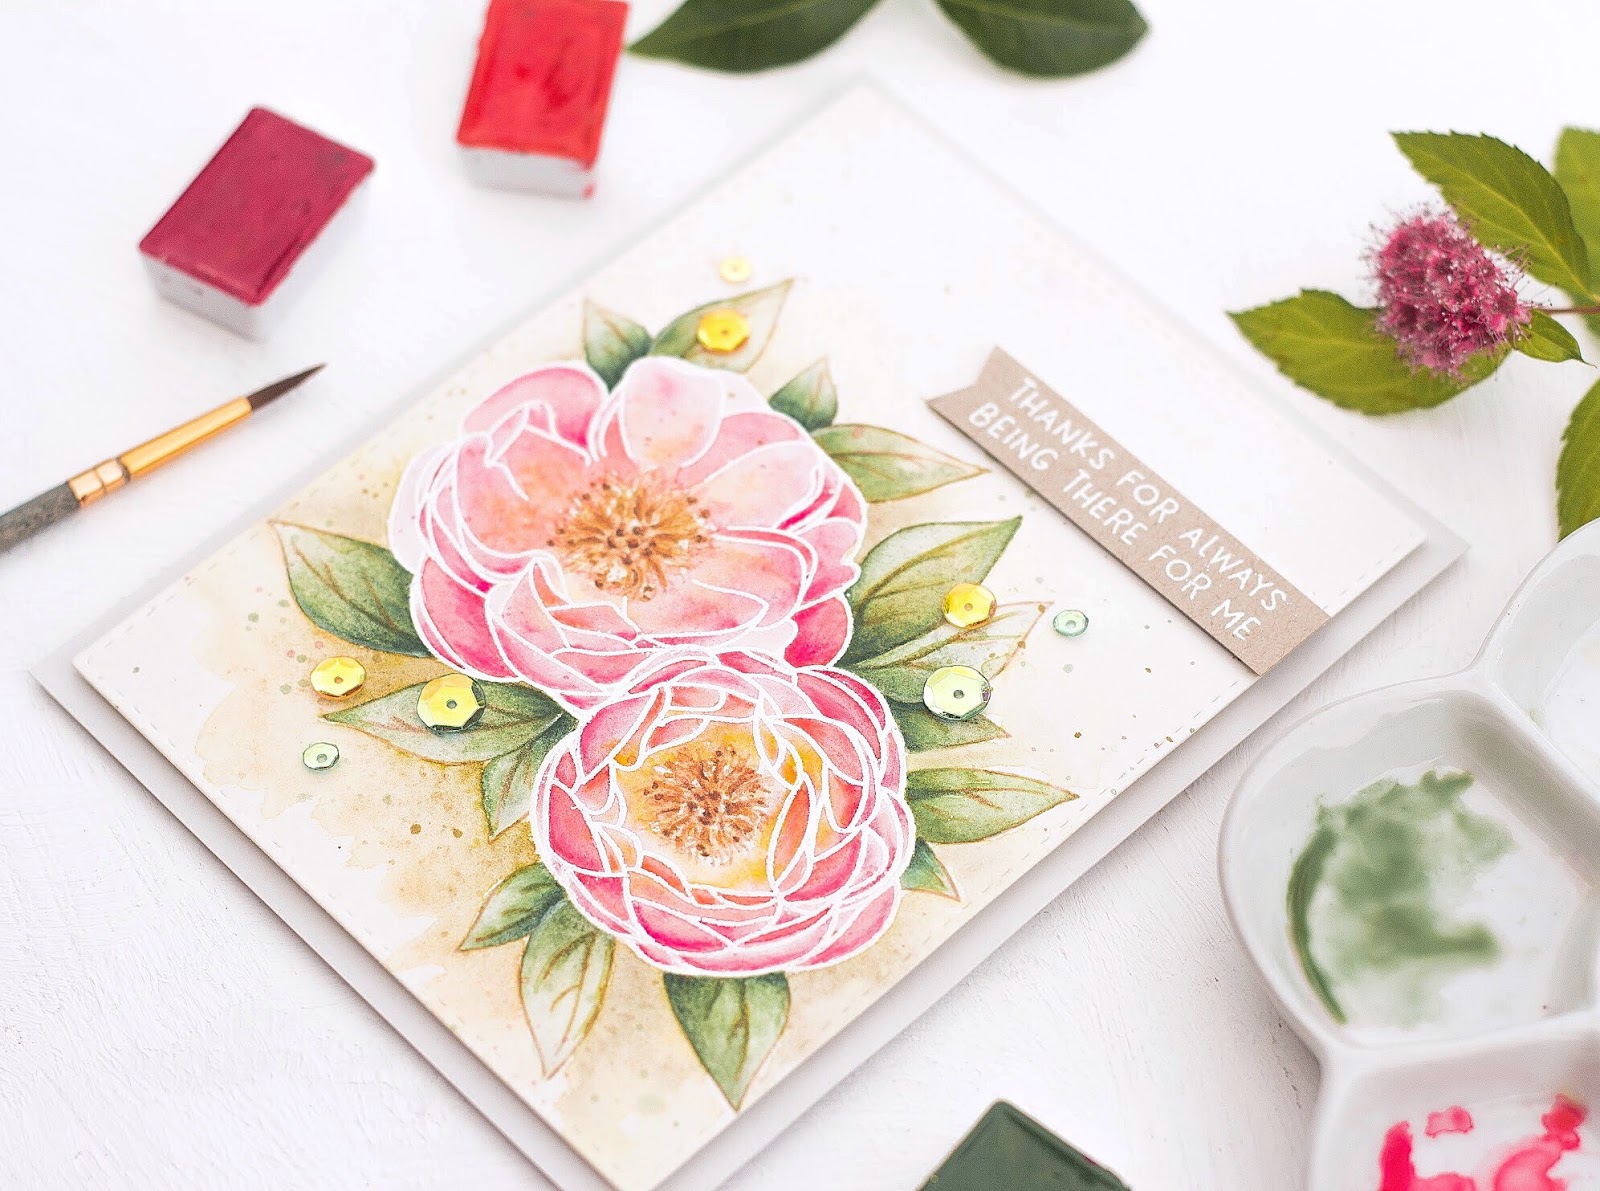 STAMP-A-FAIRE 2018: WATER YOUR FLOWERS | lachristanel design